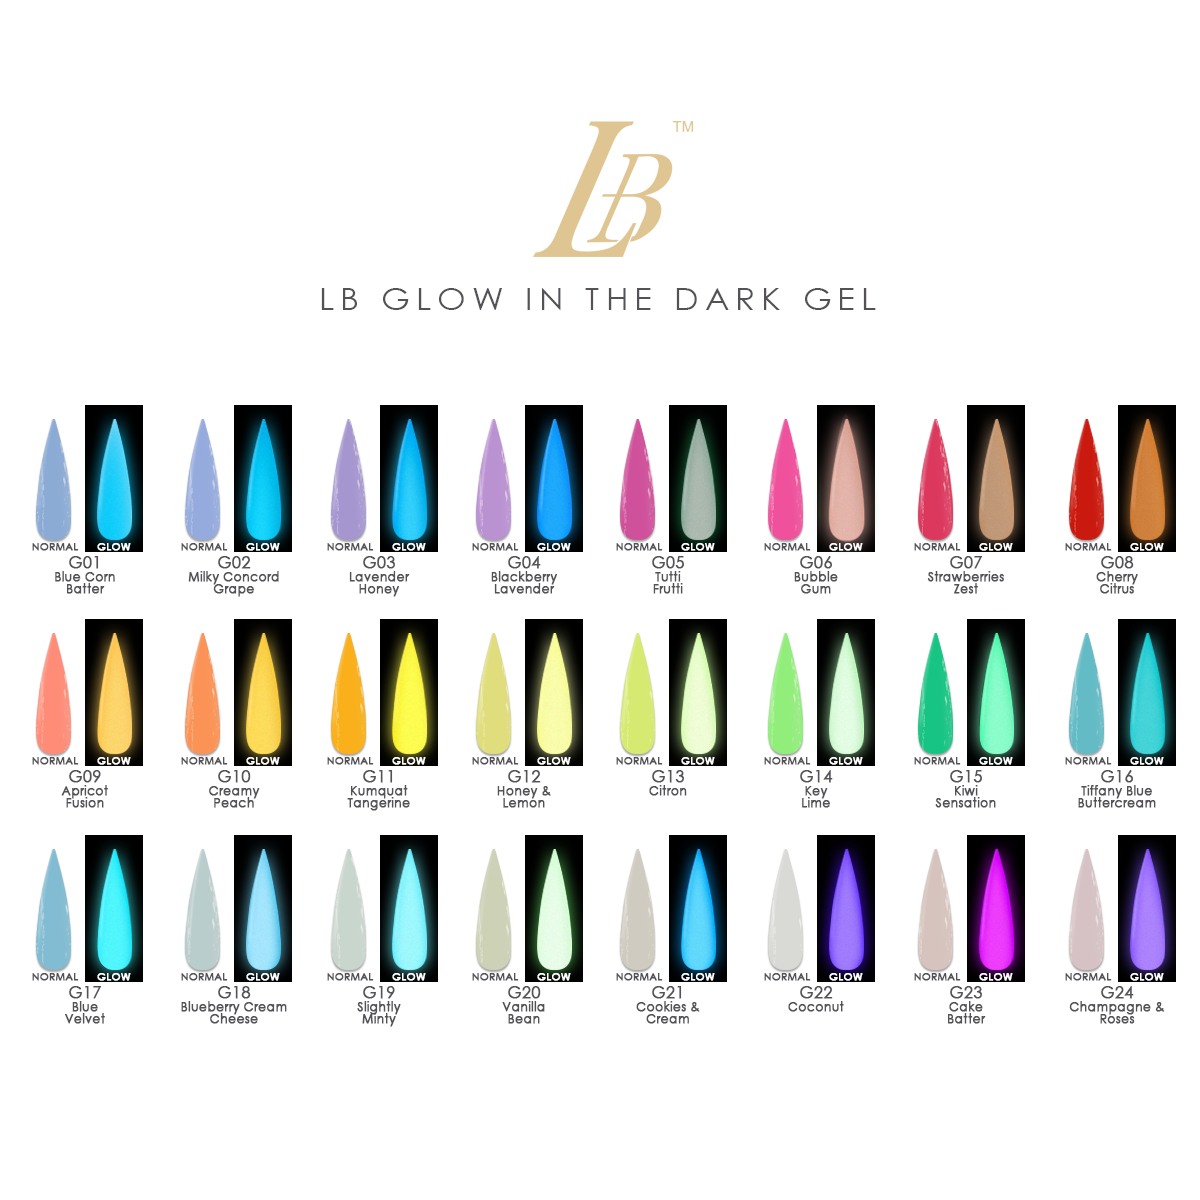 LB GLOW in the Dark Gel Professional Collection